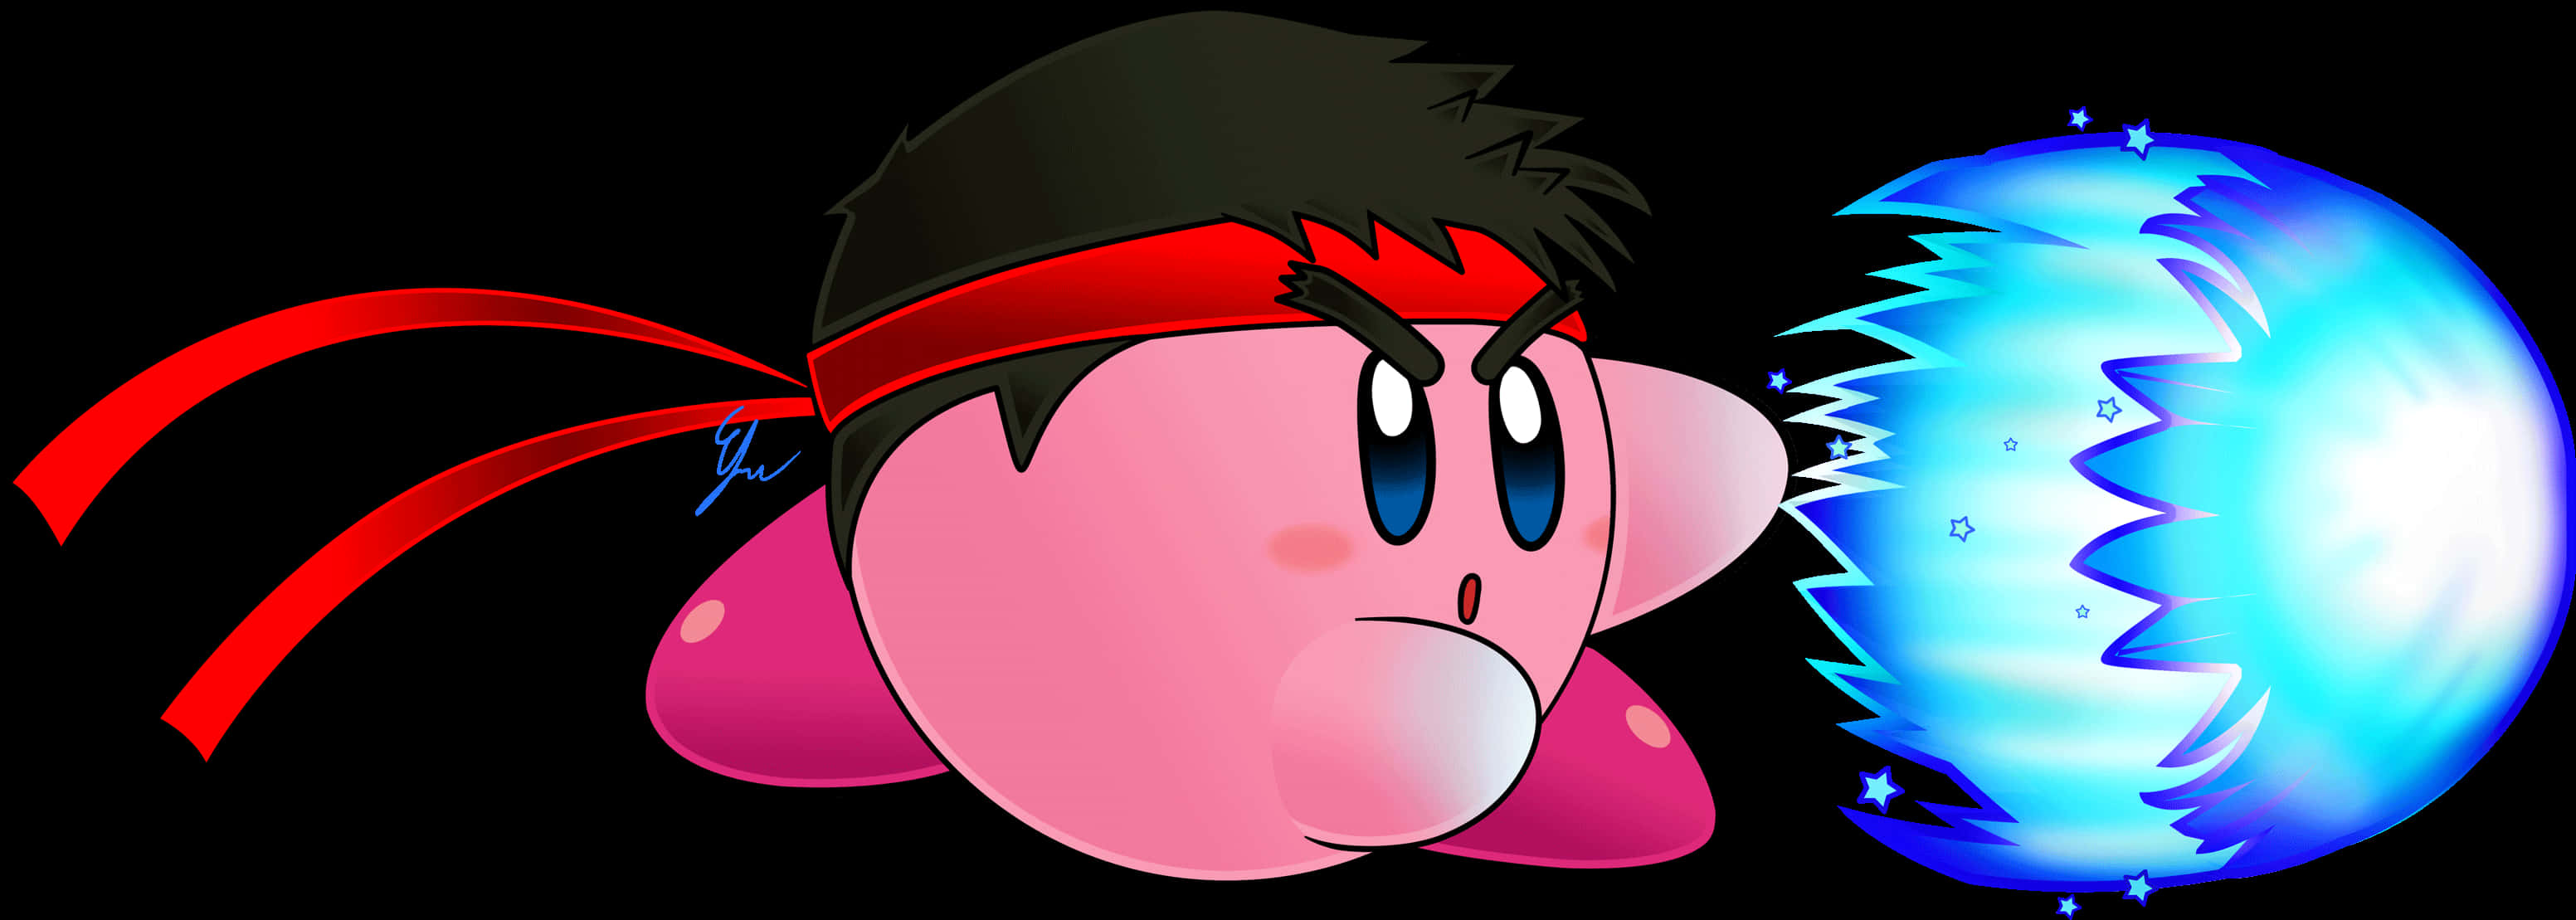 A Cartoon Of A Man With A Red Headband PNG